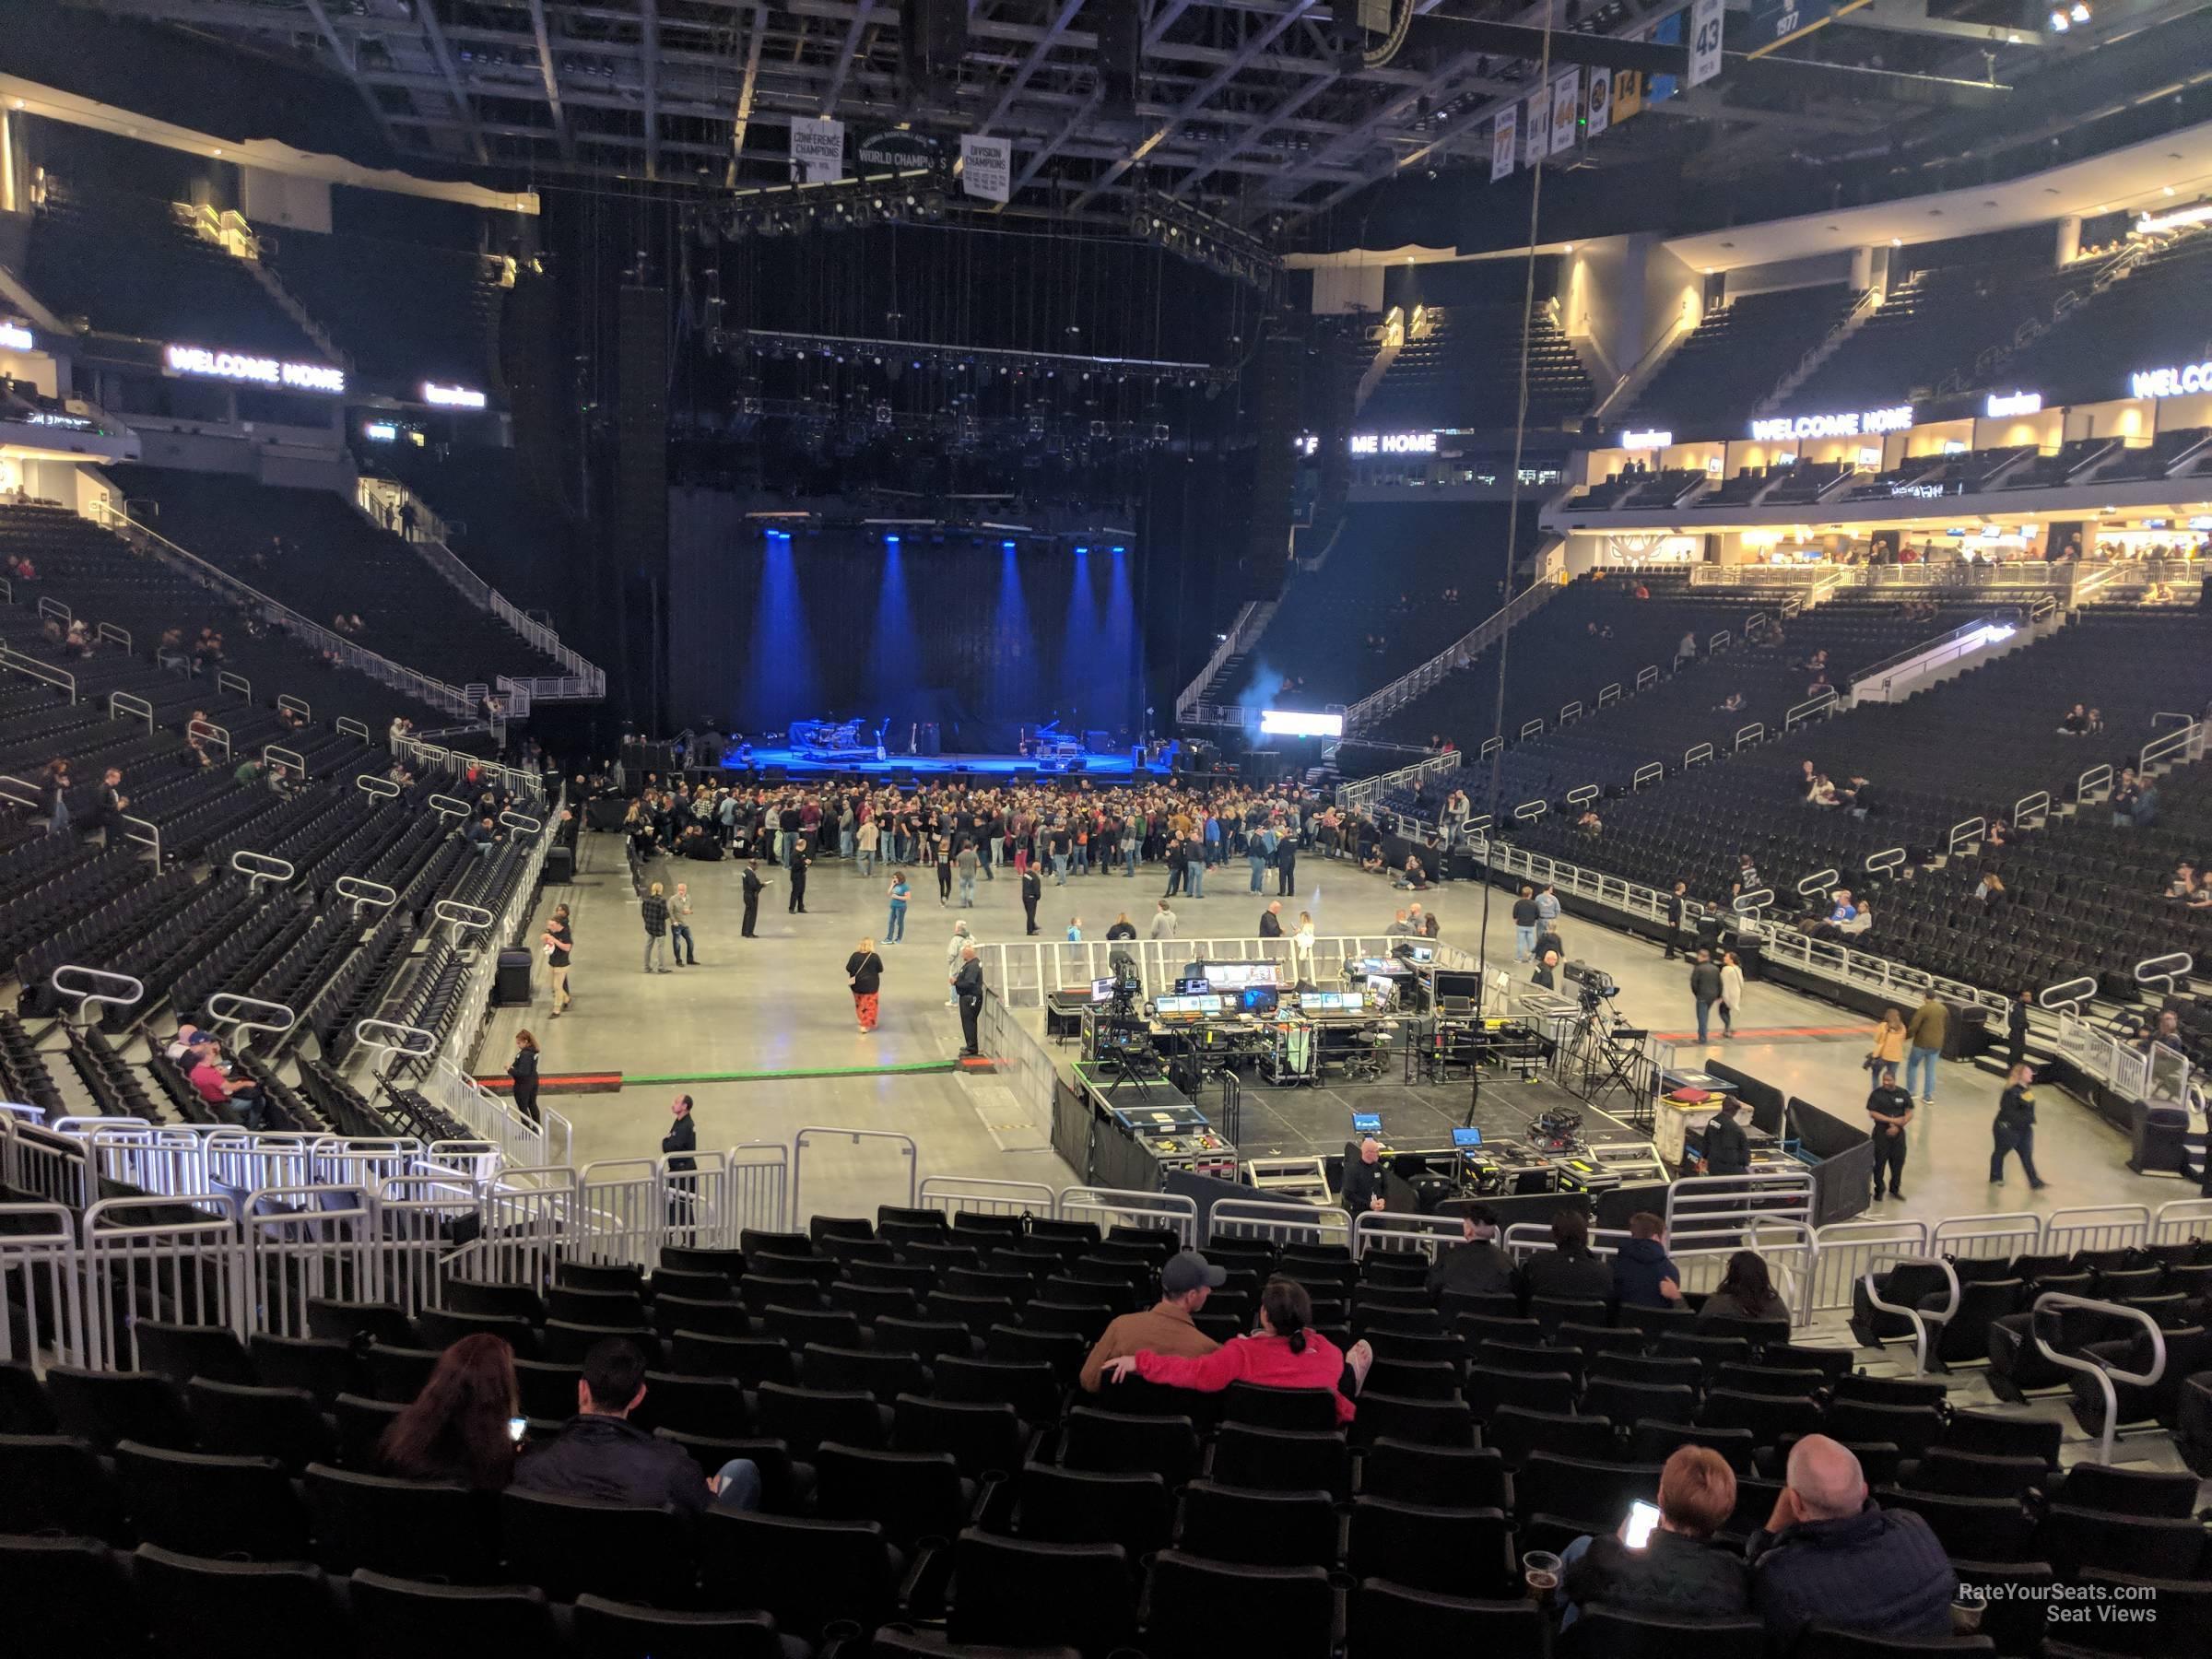 section 102, row 20 seat view  for concert - fiserv forum